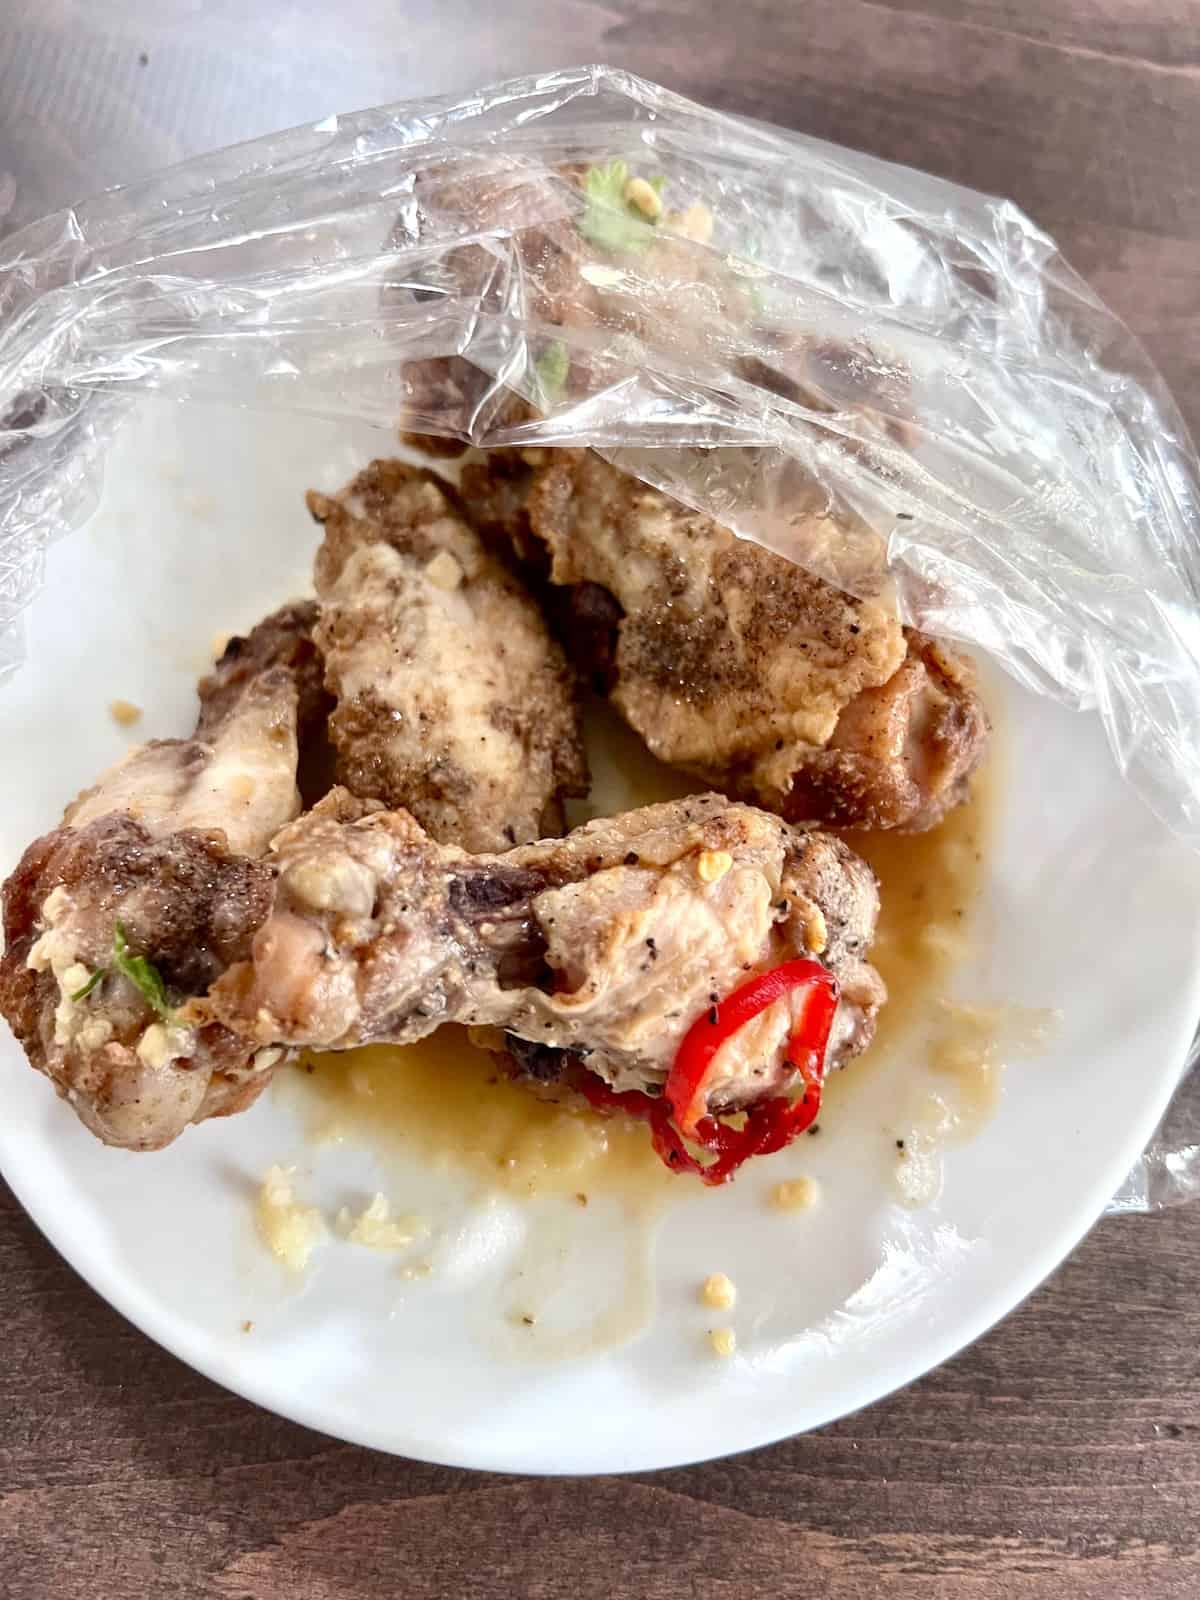 Leftover wings on a plate partially covered in plastic wrap.